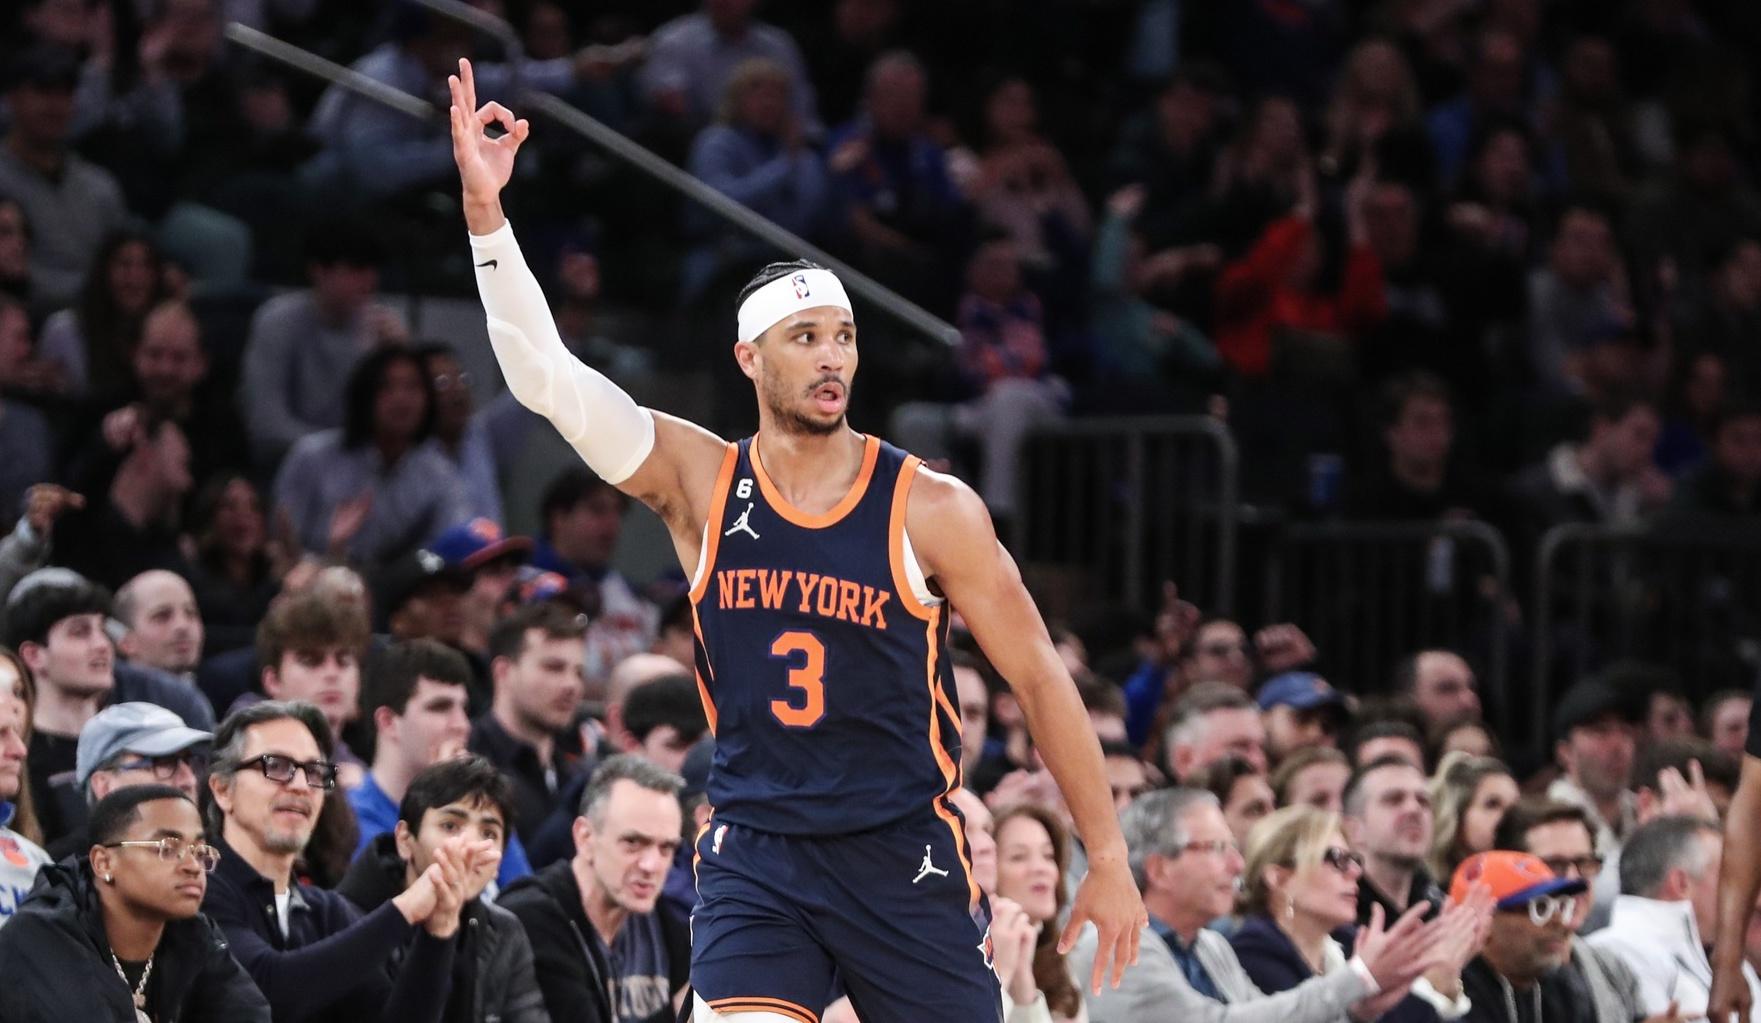 New York Knicks guard Josh Hart (3) reacts after making a three point shot in the third quarter against the New Orleans Pelicans at Madison Square Garden. / Wendell Cruz-USA TODAY Sports